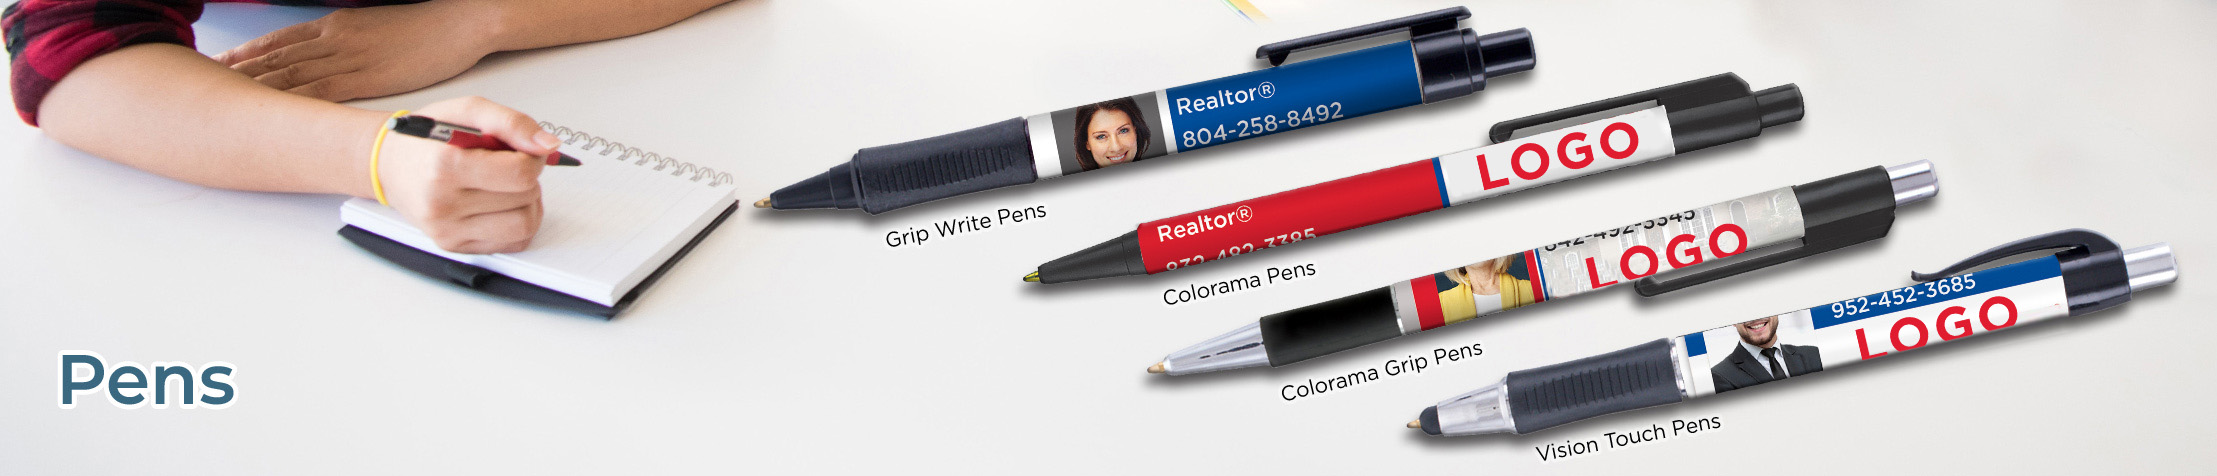 RE/MAX Real Estate Personalized Pens - promotional products: Grip Write Pens, Colorama Pens, Vision Touch Pens, and Colorama Grip Pens | BestPrintBuy.com